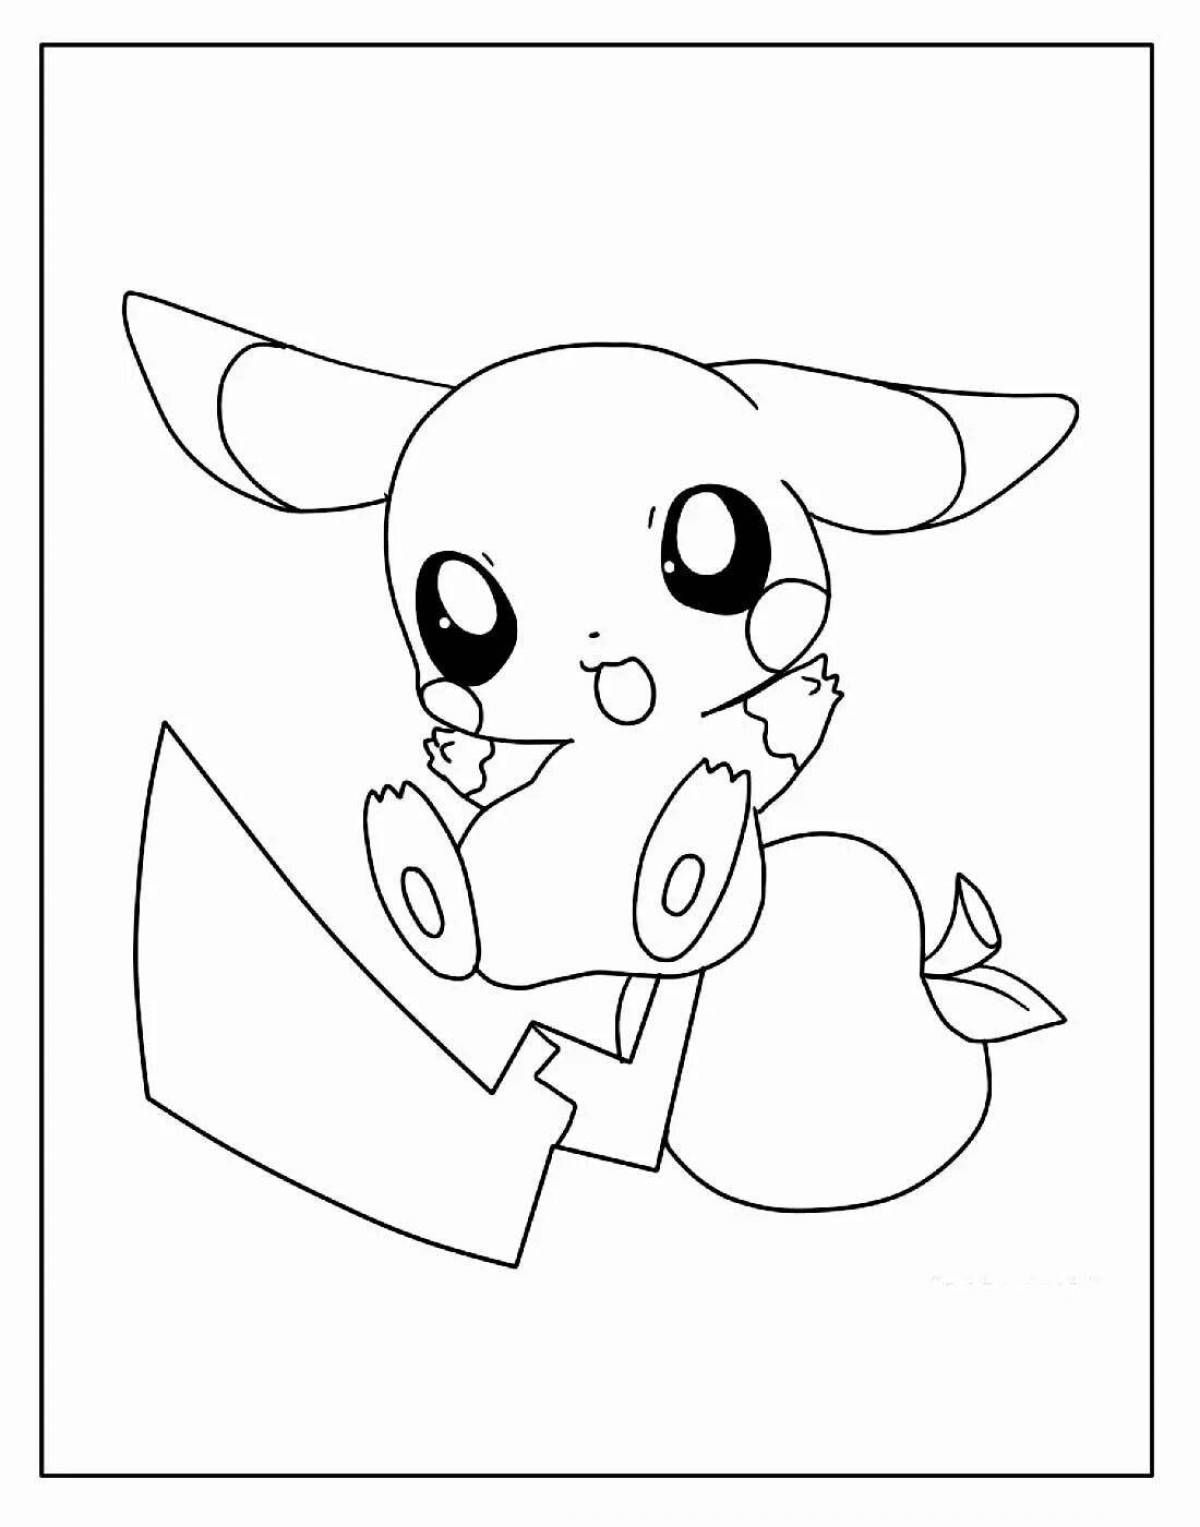 Adorable anime animal coloring pages for girls